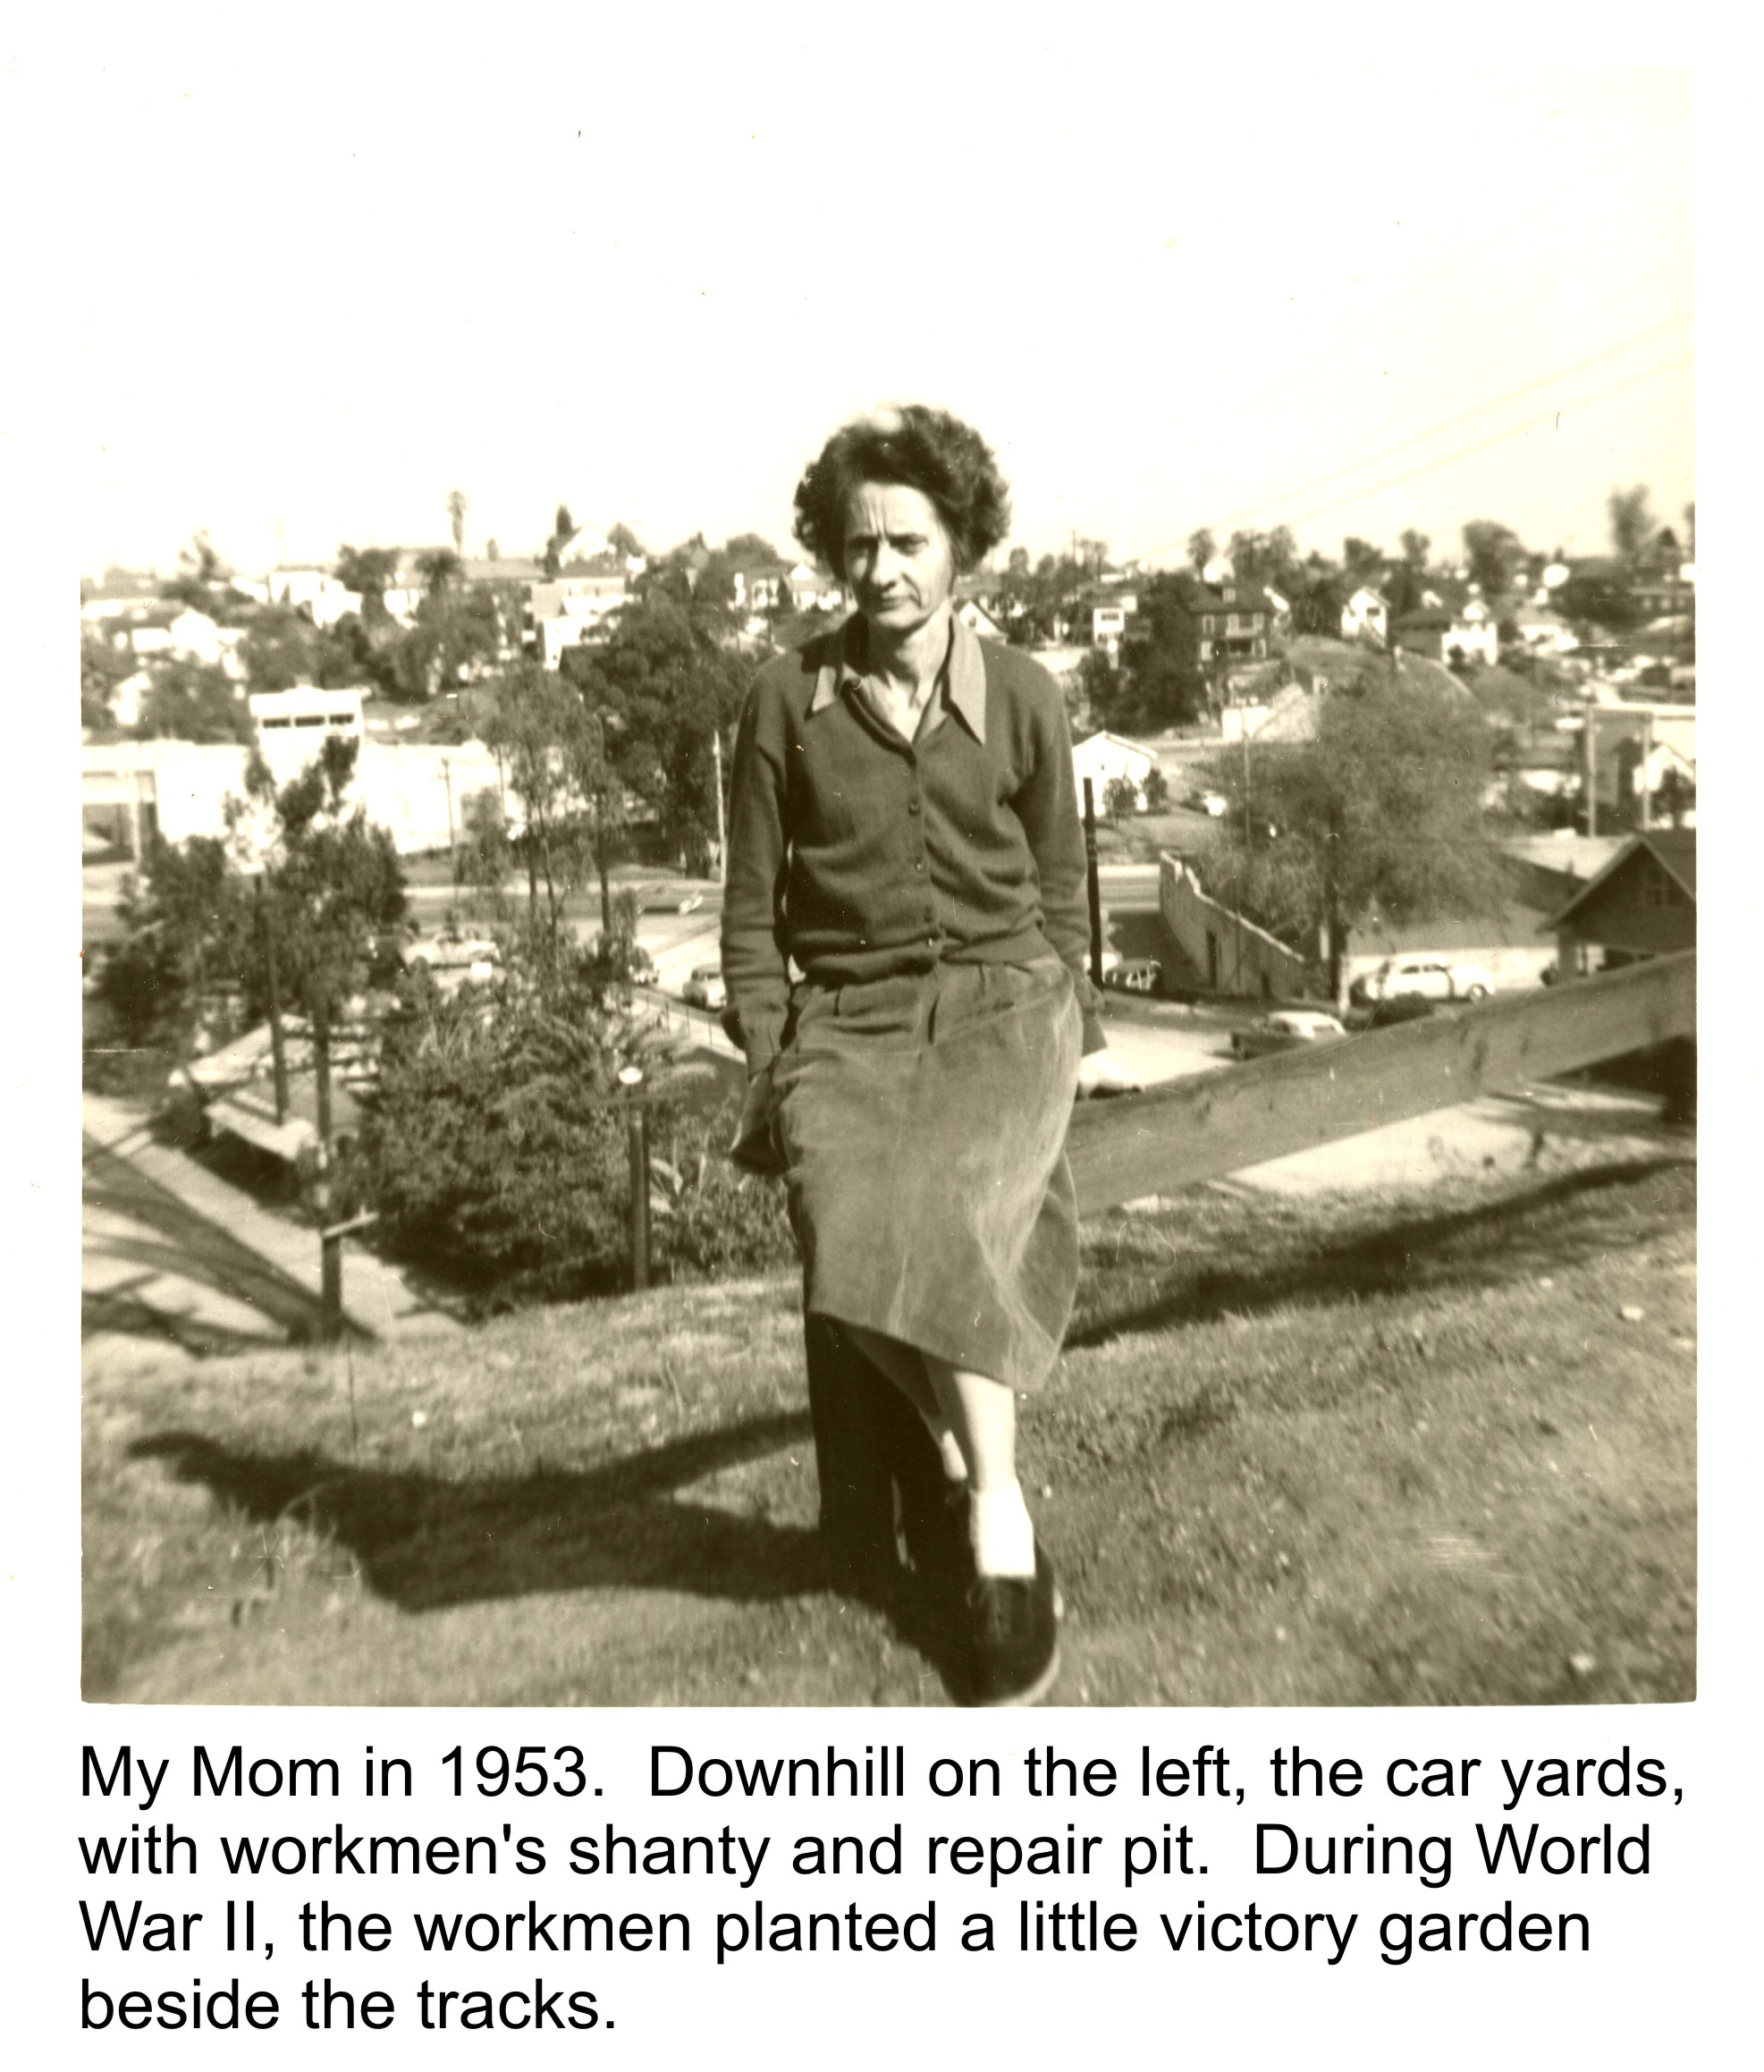 My Mom, yards in background